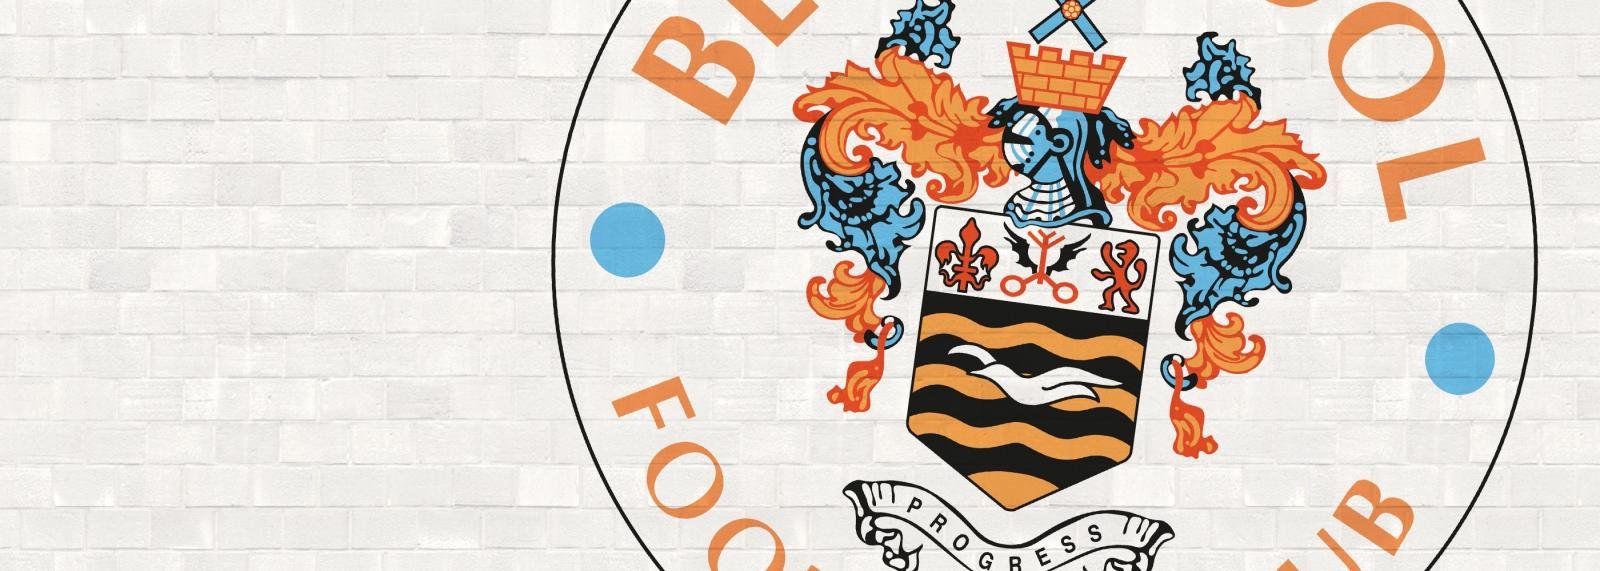 Relegation was inevitable, but Blackpool went down without a fight